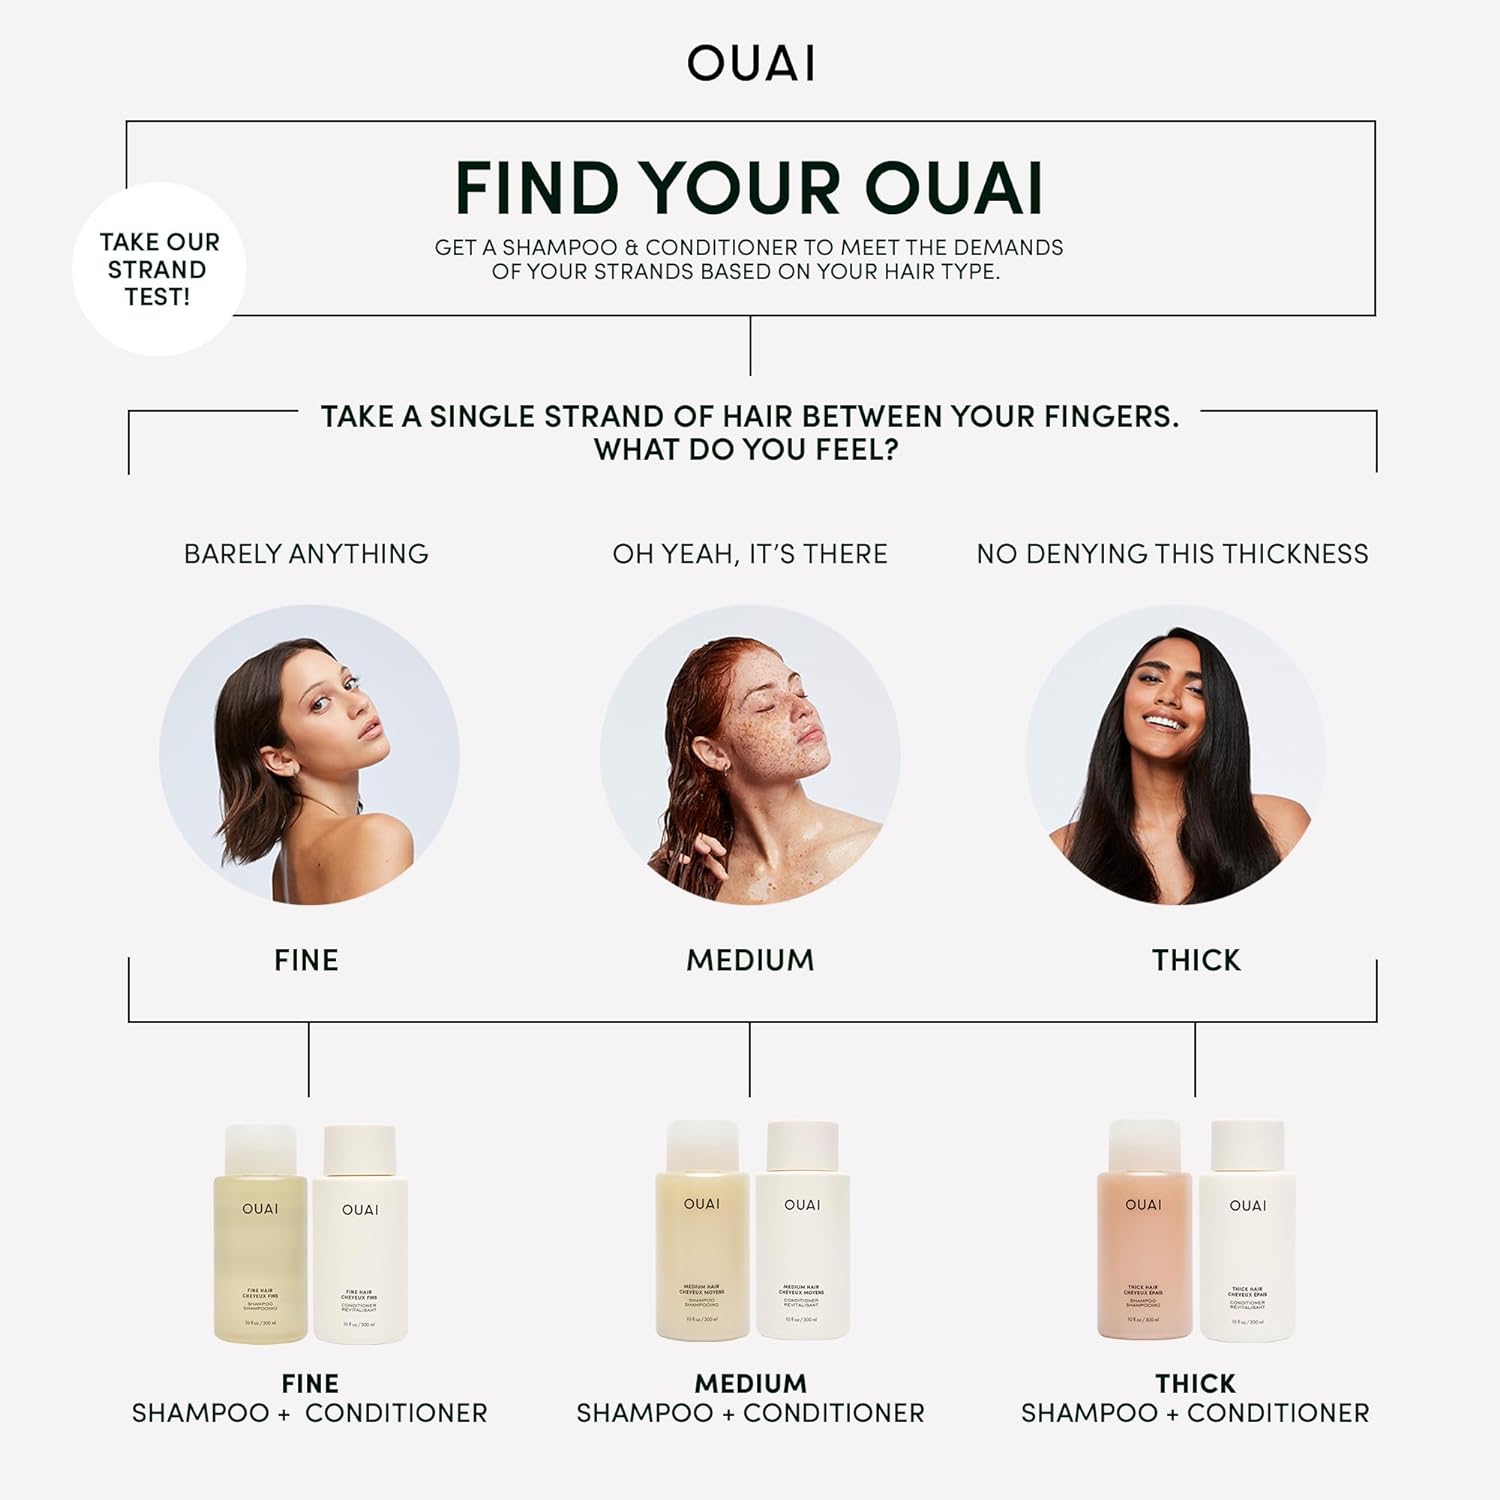 OUAI Medium Hair Bundle - Conditioner, Shampoo & Hair Treatment Masque Formulated with With Shea Butter, Keratin and Panthenol - Paraben, Phthalate and Sulfate Free Hair Care (10 Oz/10 Oz/8 Fl Oz) : Beauty & Personal Care